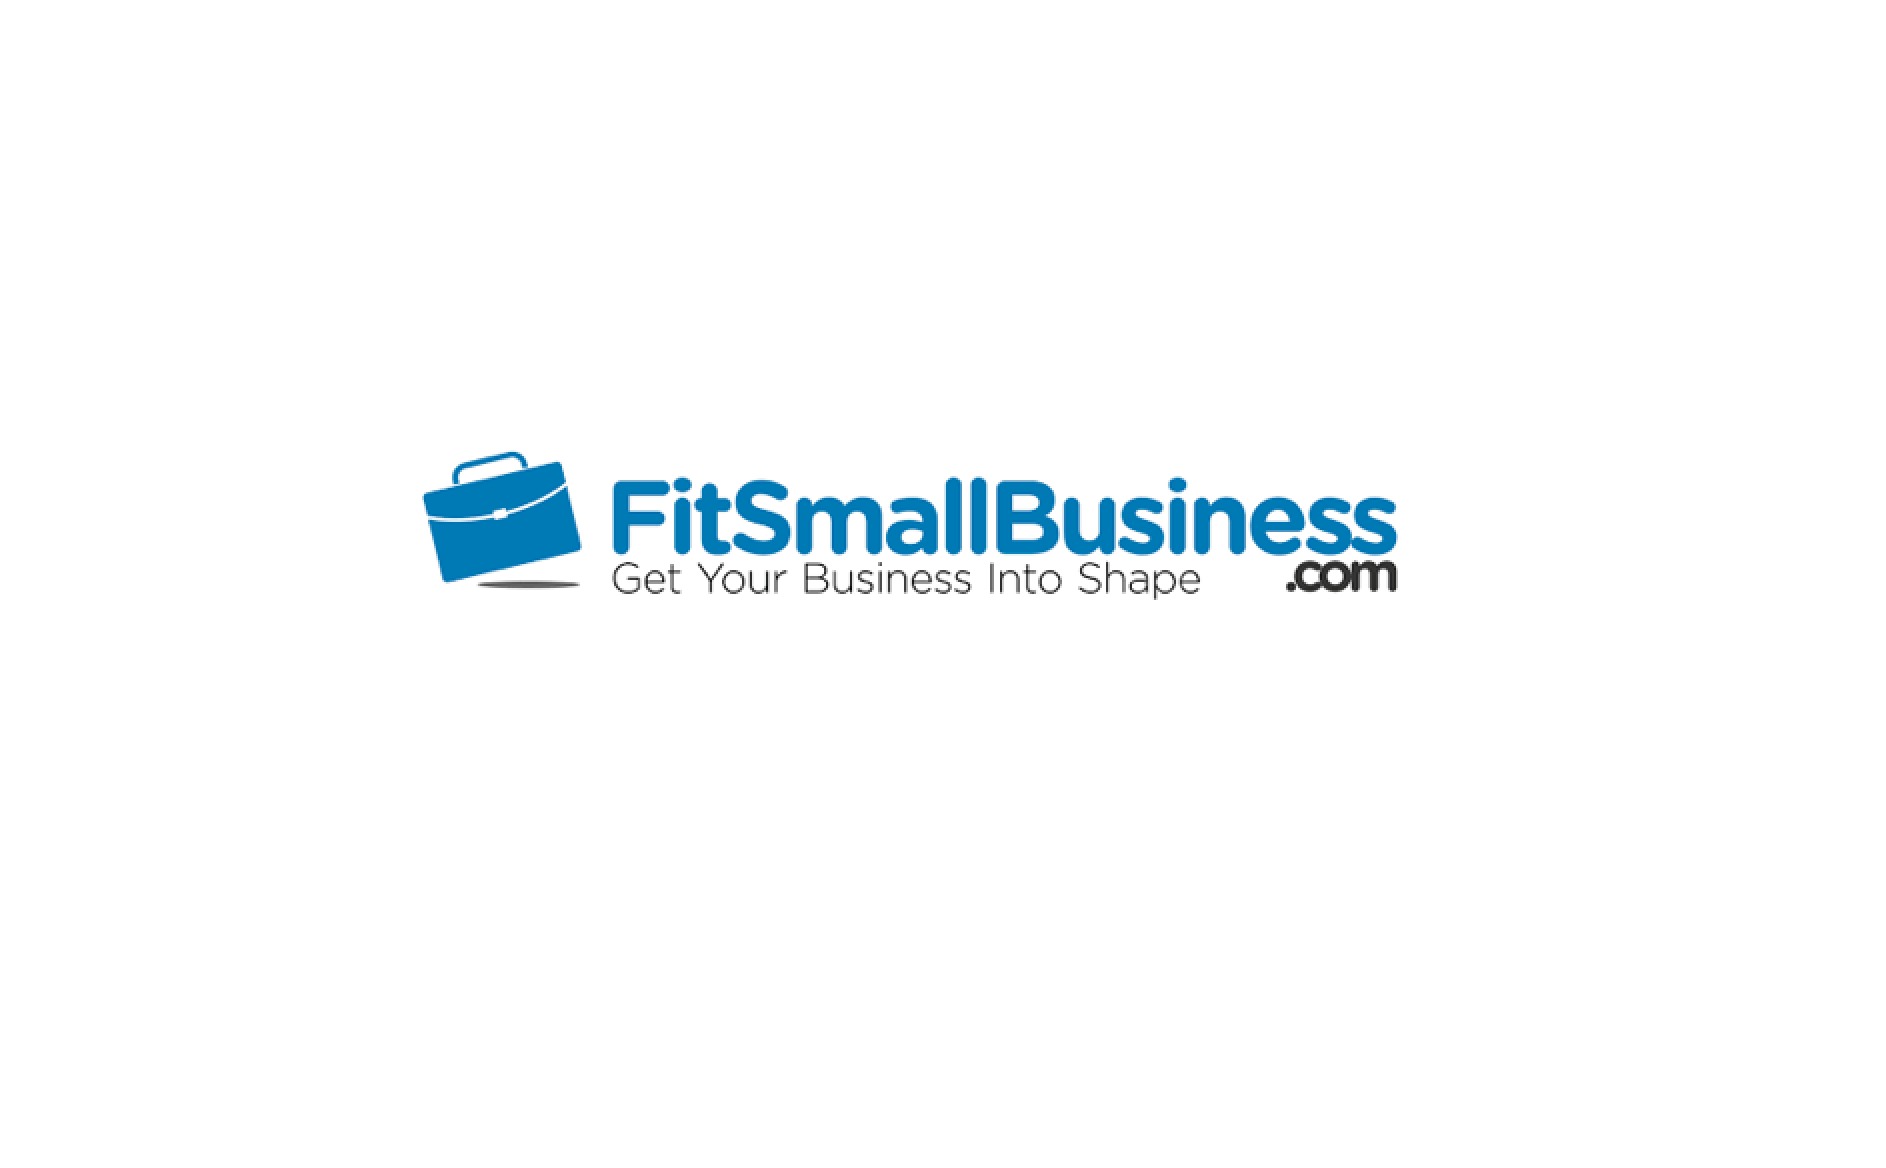 fit-small-business-florida-real-estate-market-trends-summer-2018